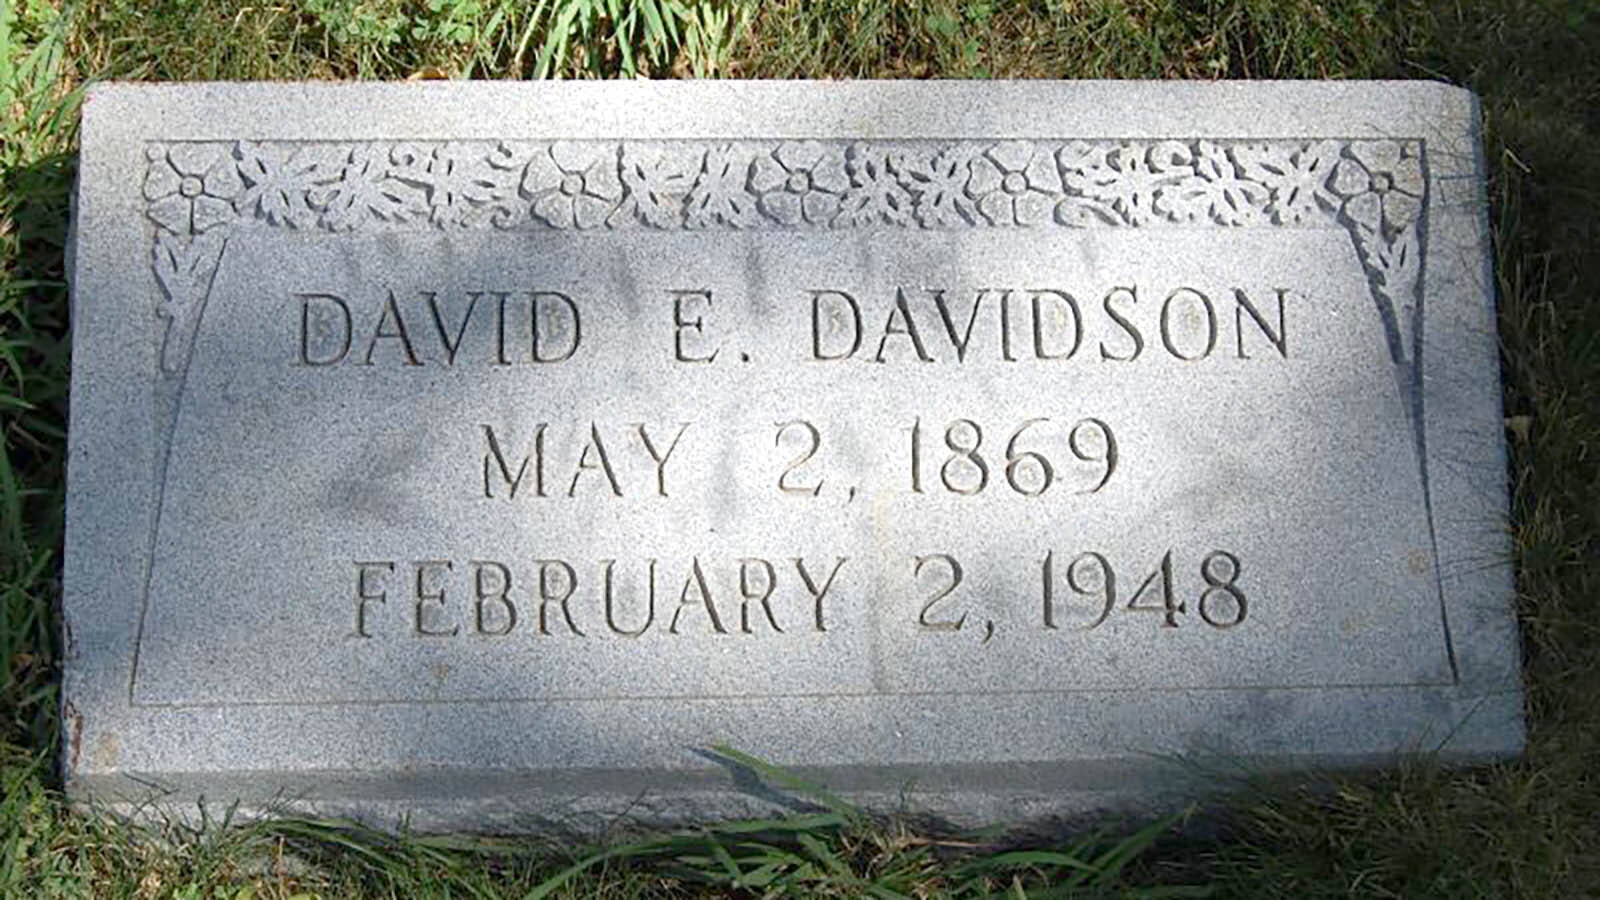 David Davidson, who died in 1948 and is buried at Highland Cemetery in Casper, left a legacy as a popular character in Casper and a bootlegger.